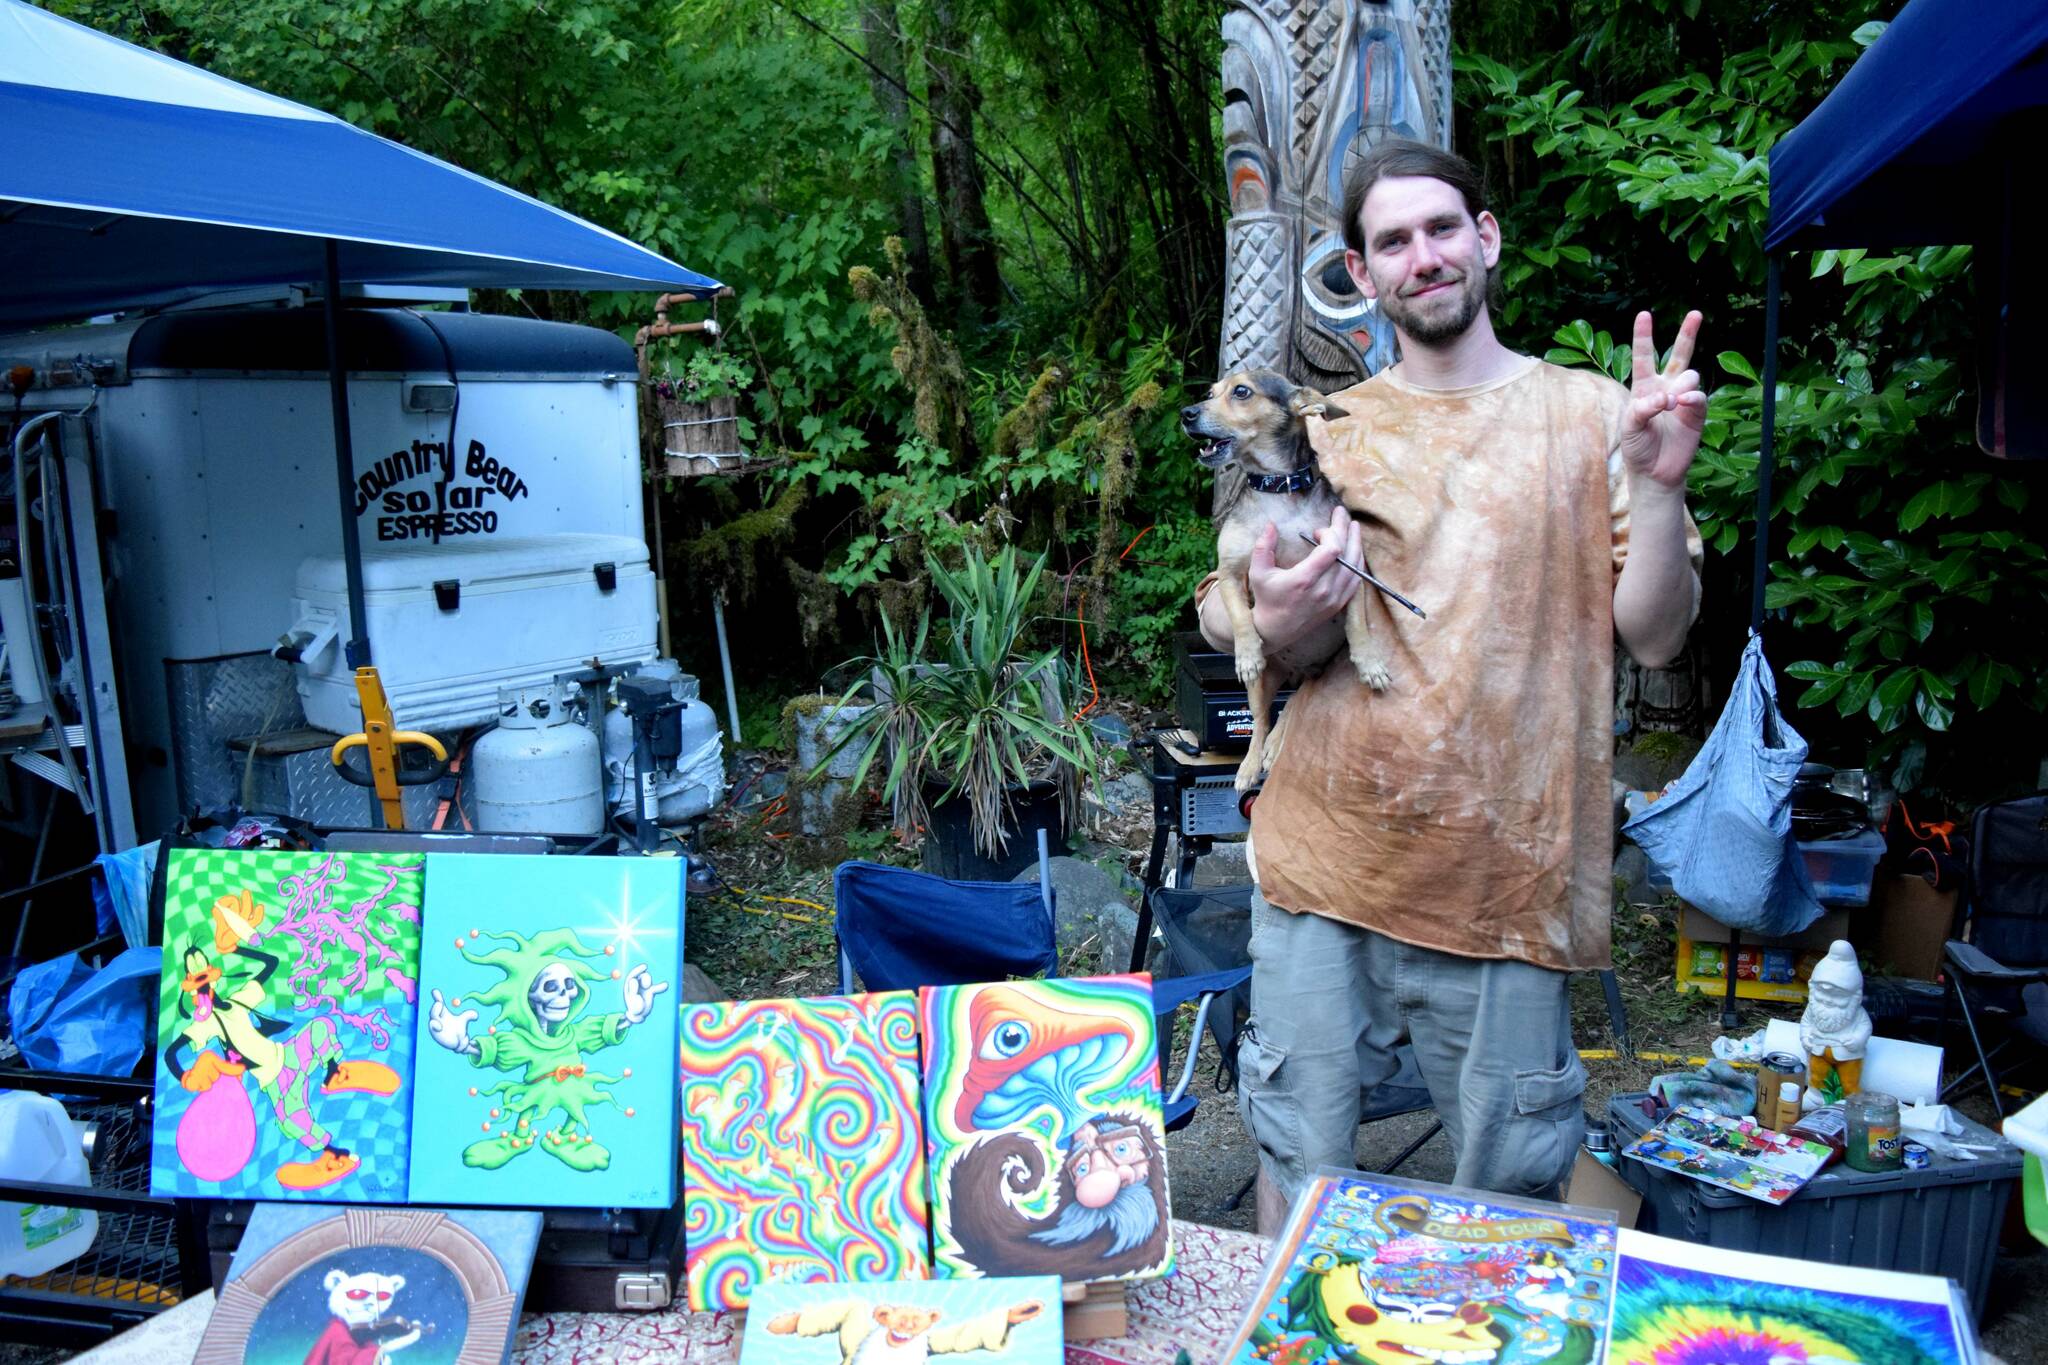 Artist James McNulty (@uncommonculturejames) poses with his work.